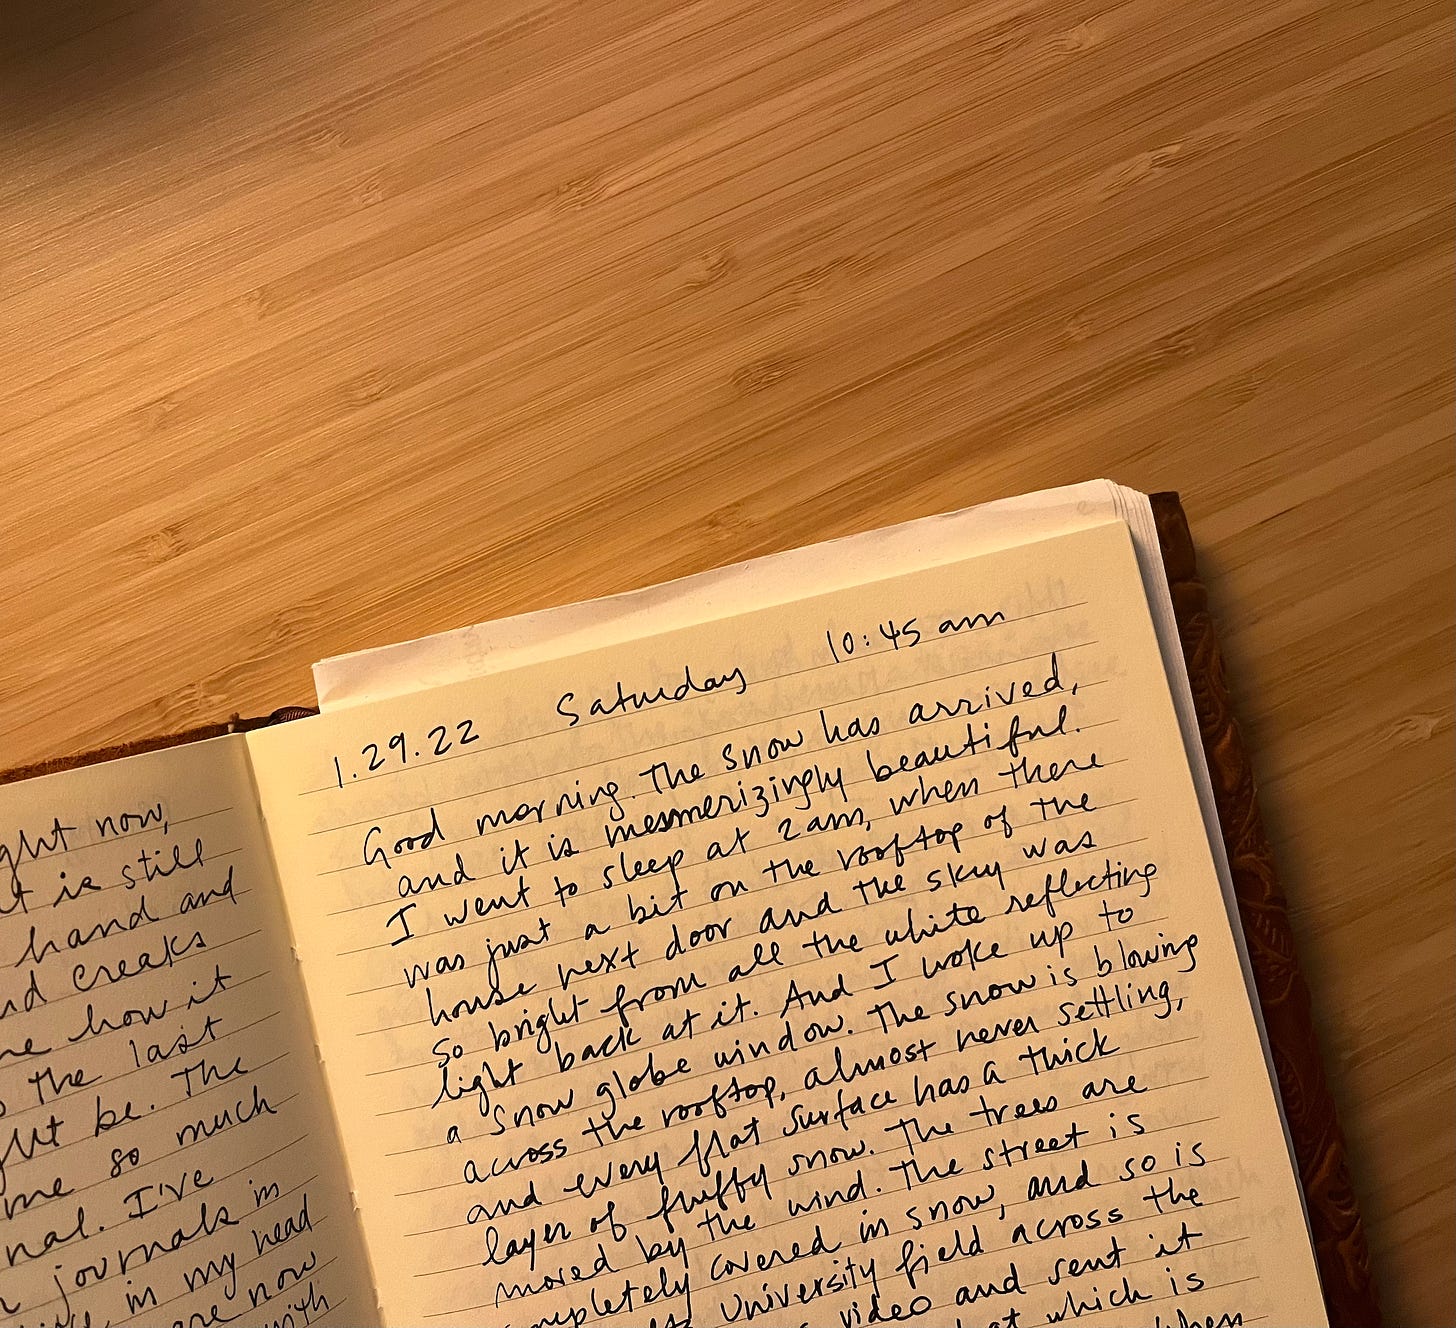 A photo of the corner of Isa's open diary, on a wooden table. On the right page, part of an entry is visible, from January 29, 2022. It was written that Saturday at 10:45 am. 